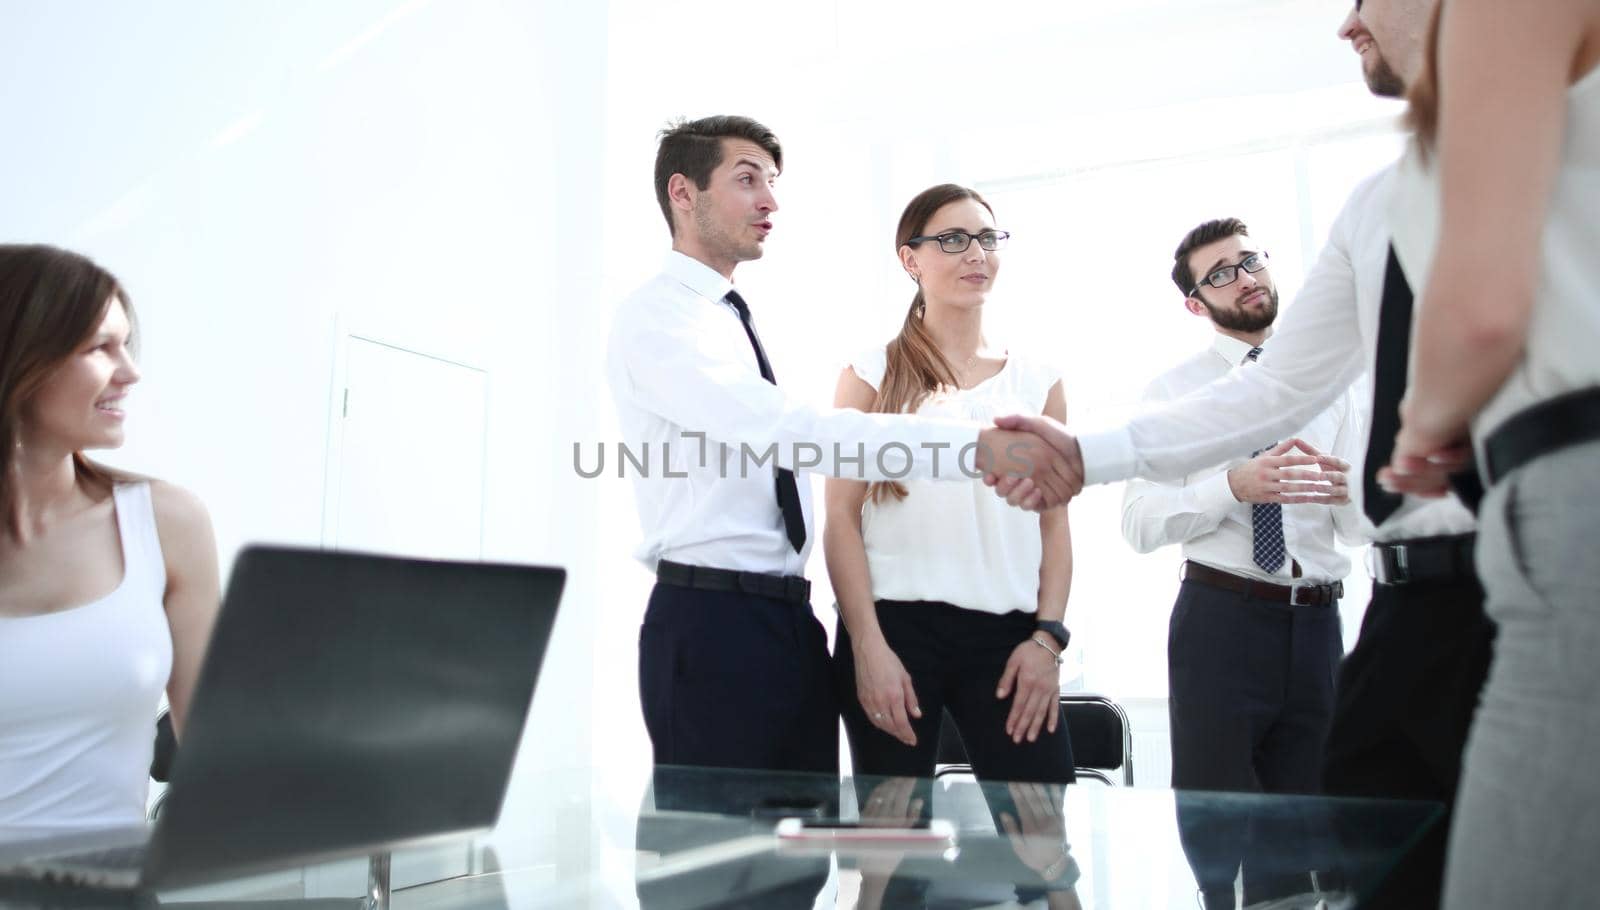 project Manager shaking hands with an employee of the company.photo with copy space